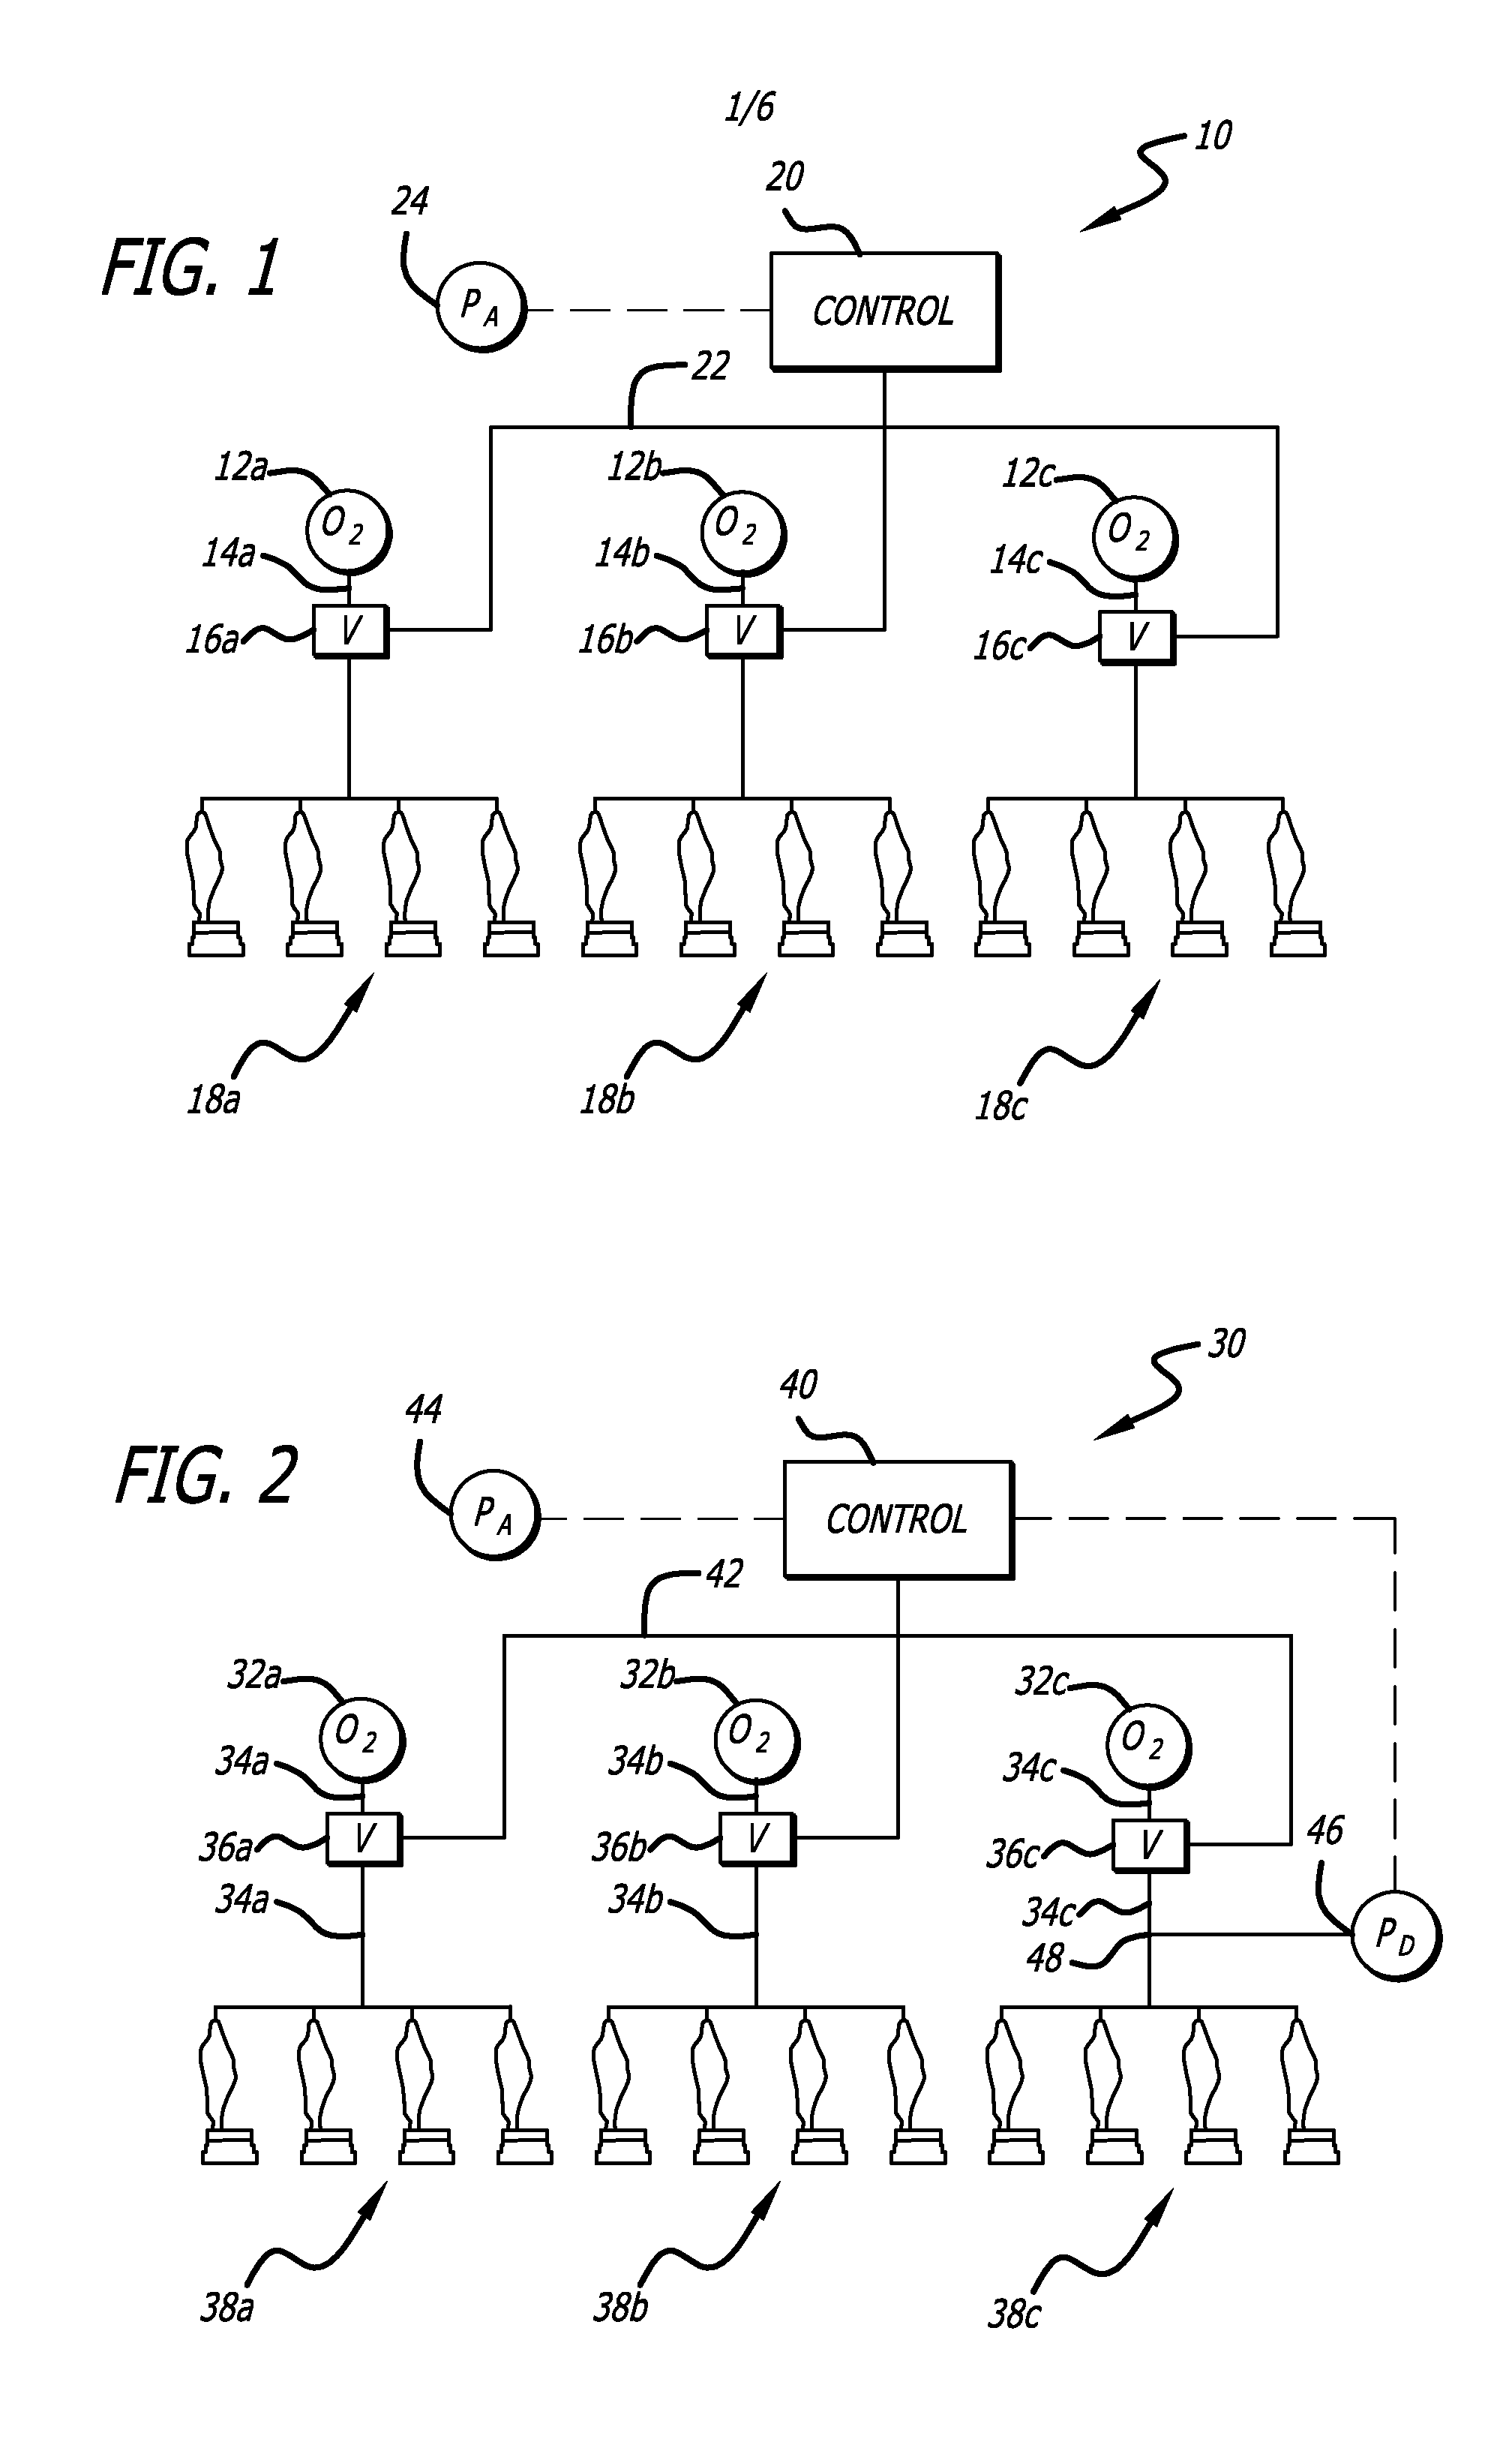 System for regulating the dispensing of commercial aircraft passenger oxygen supply